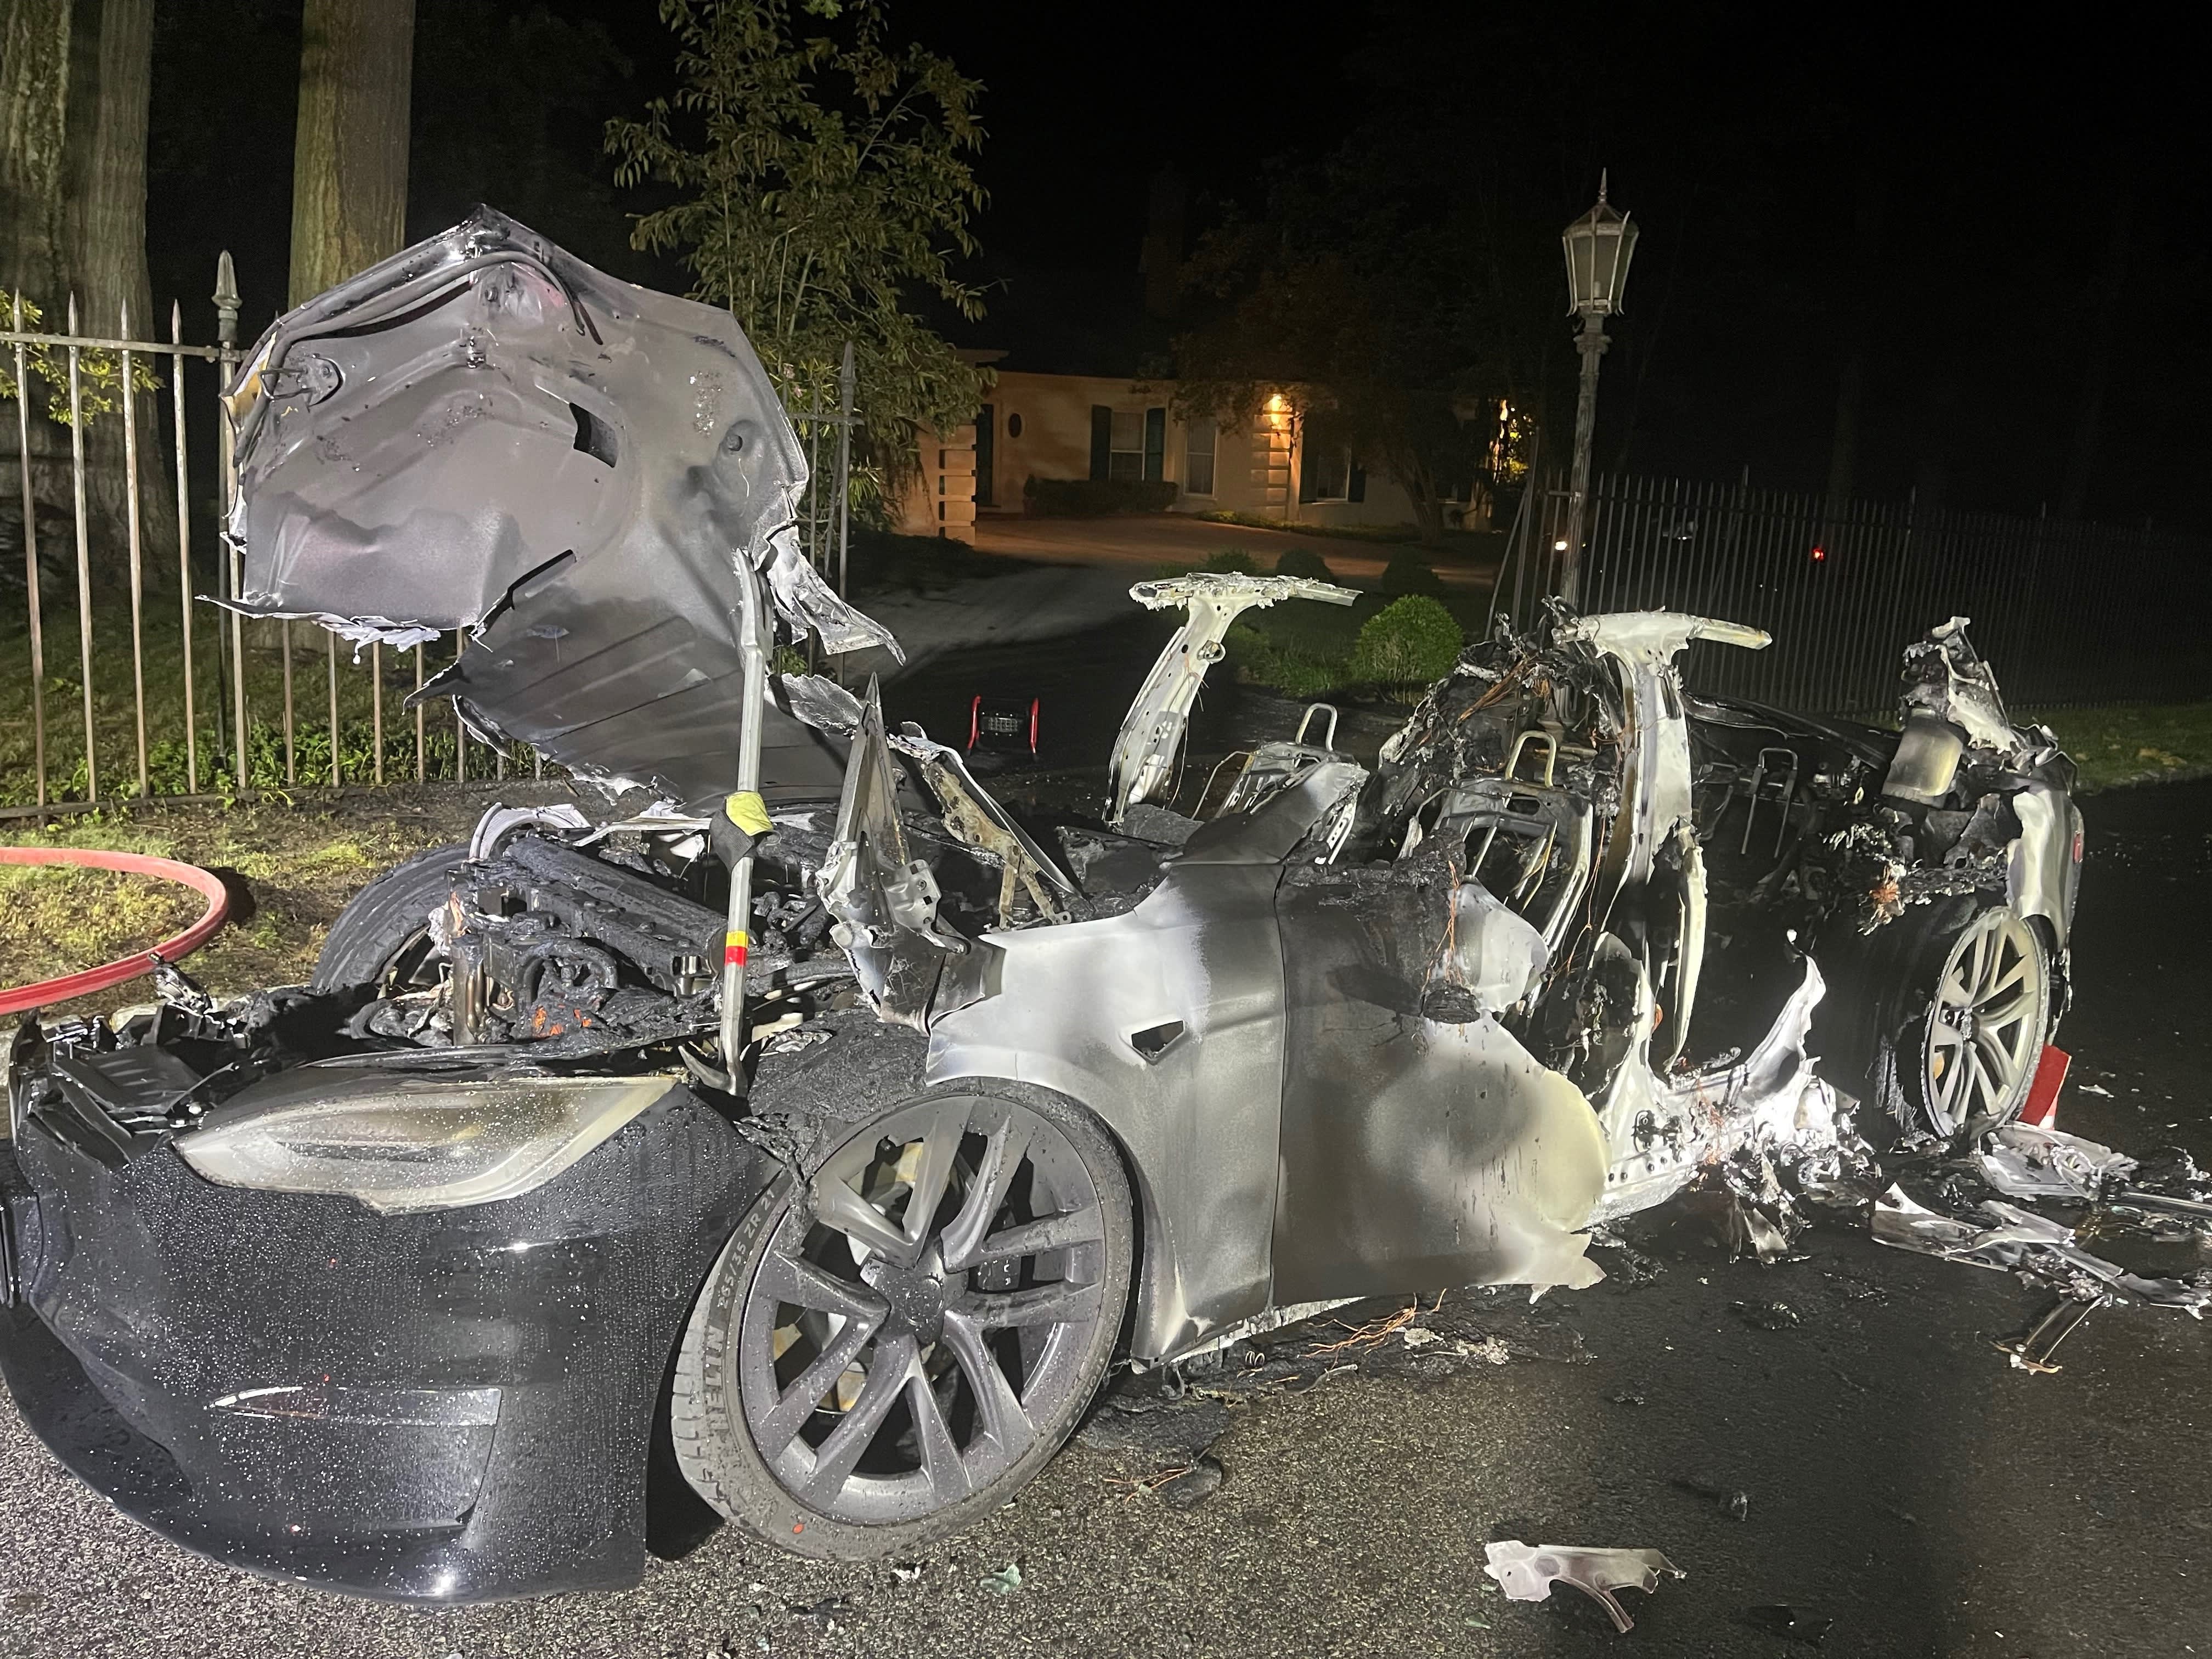 Tesla Model S Plaid caught fire while being driven: fire chief